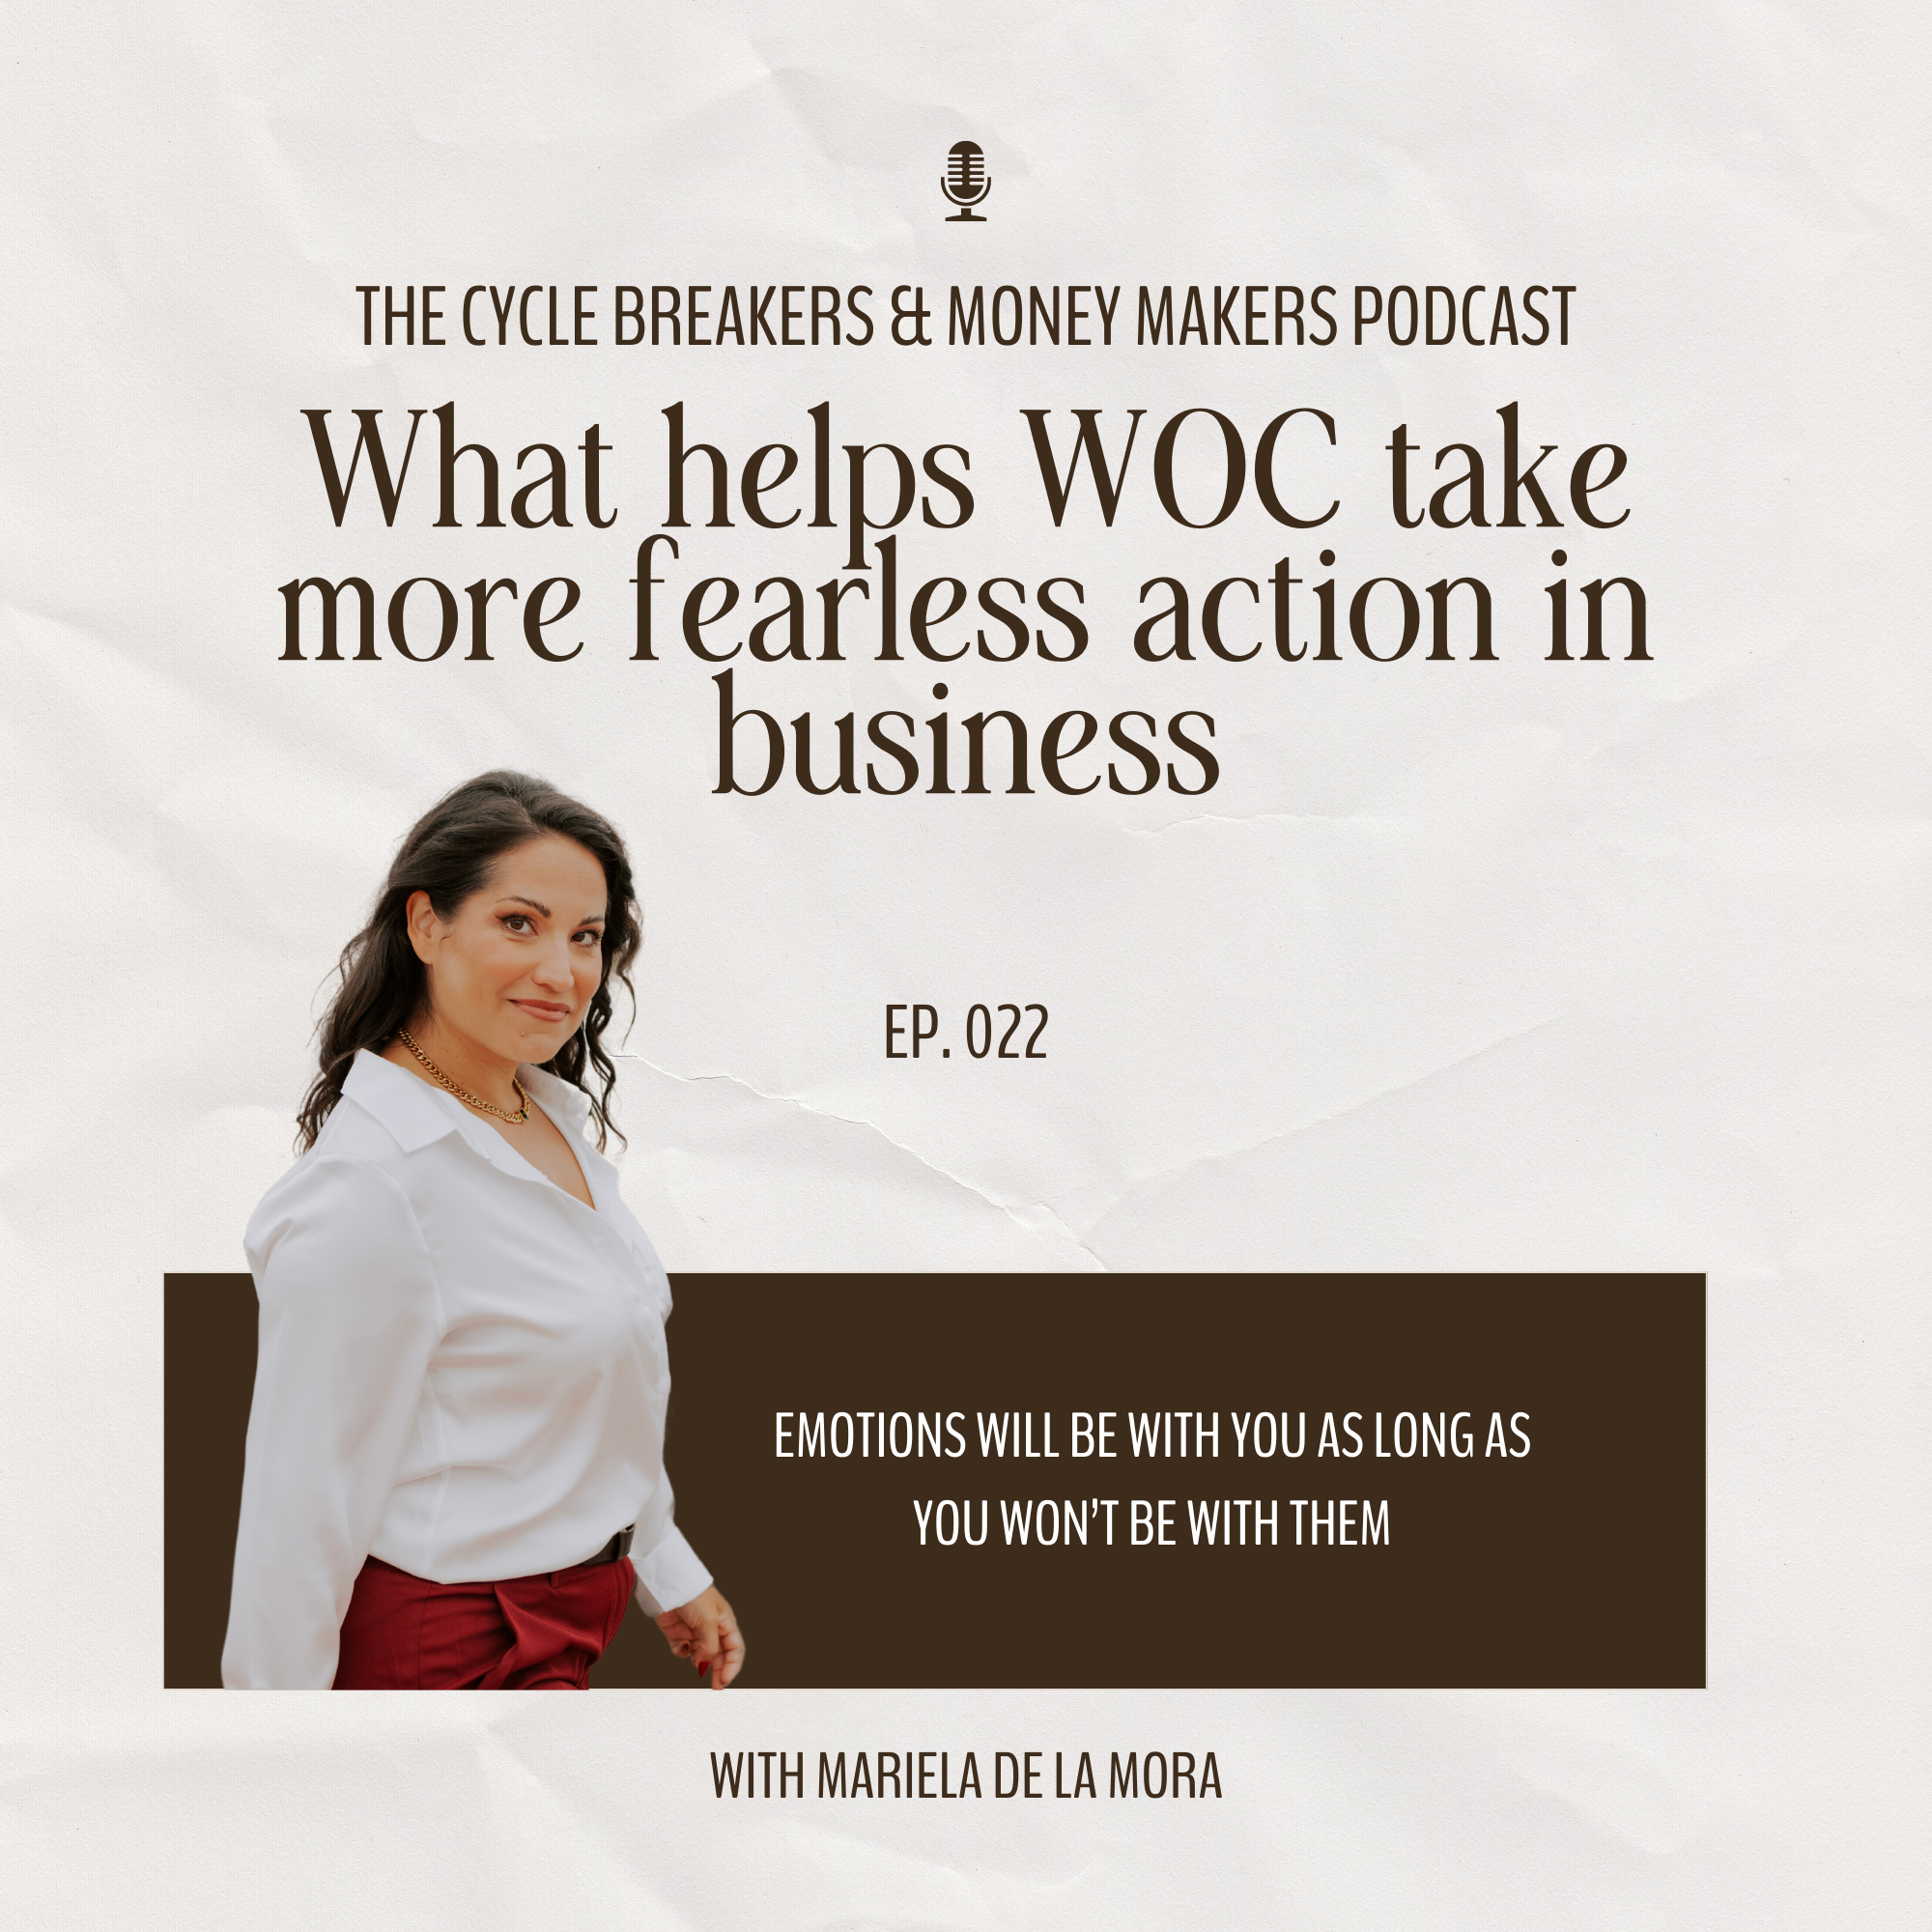 What helps WOC take more fearless action in business